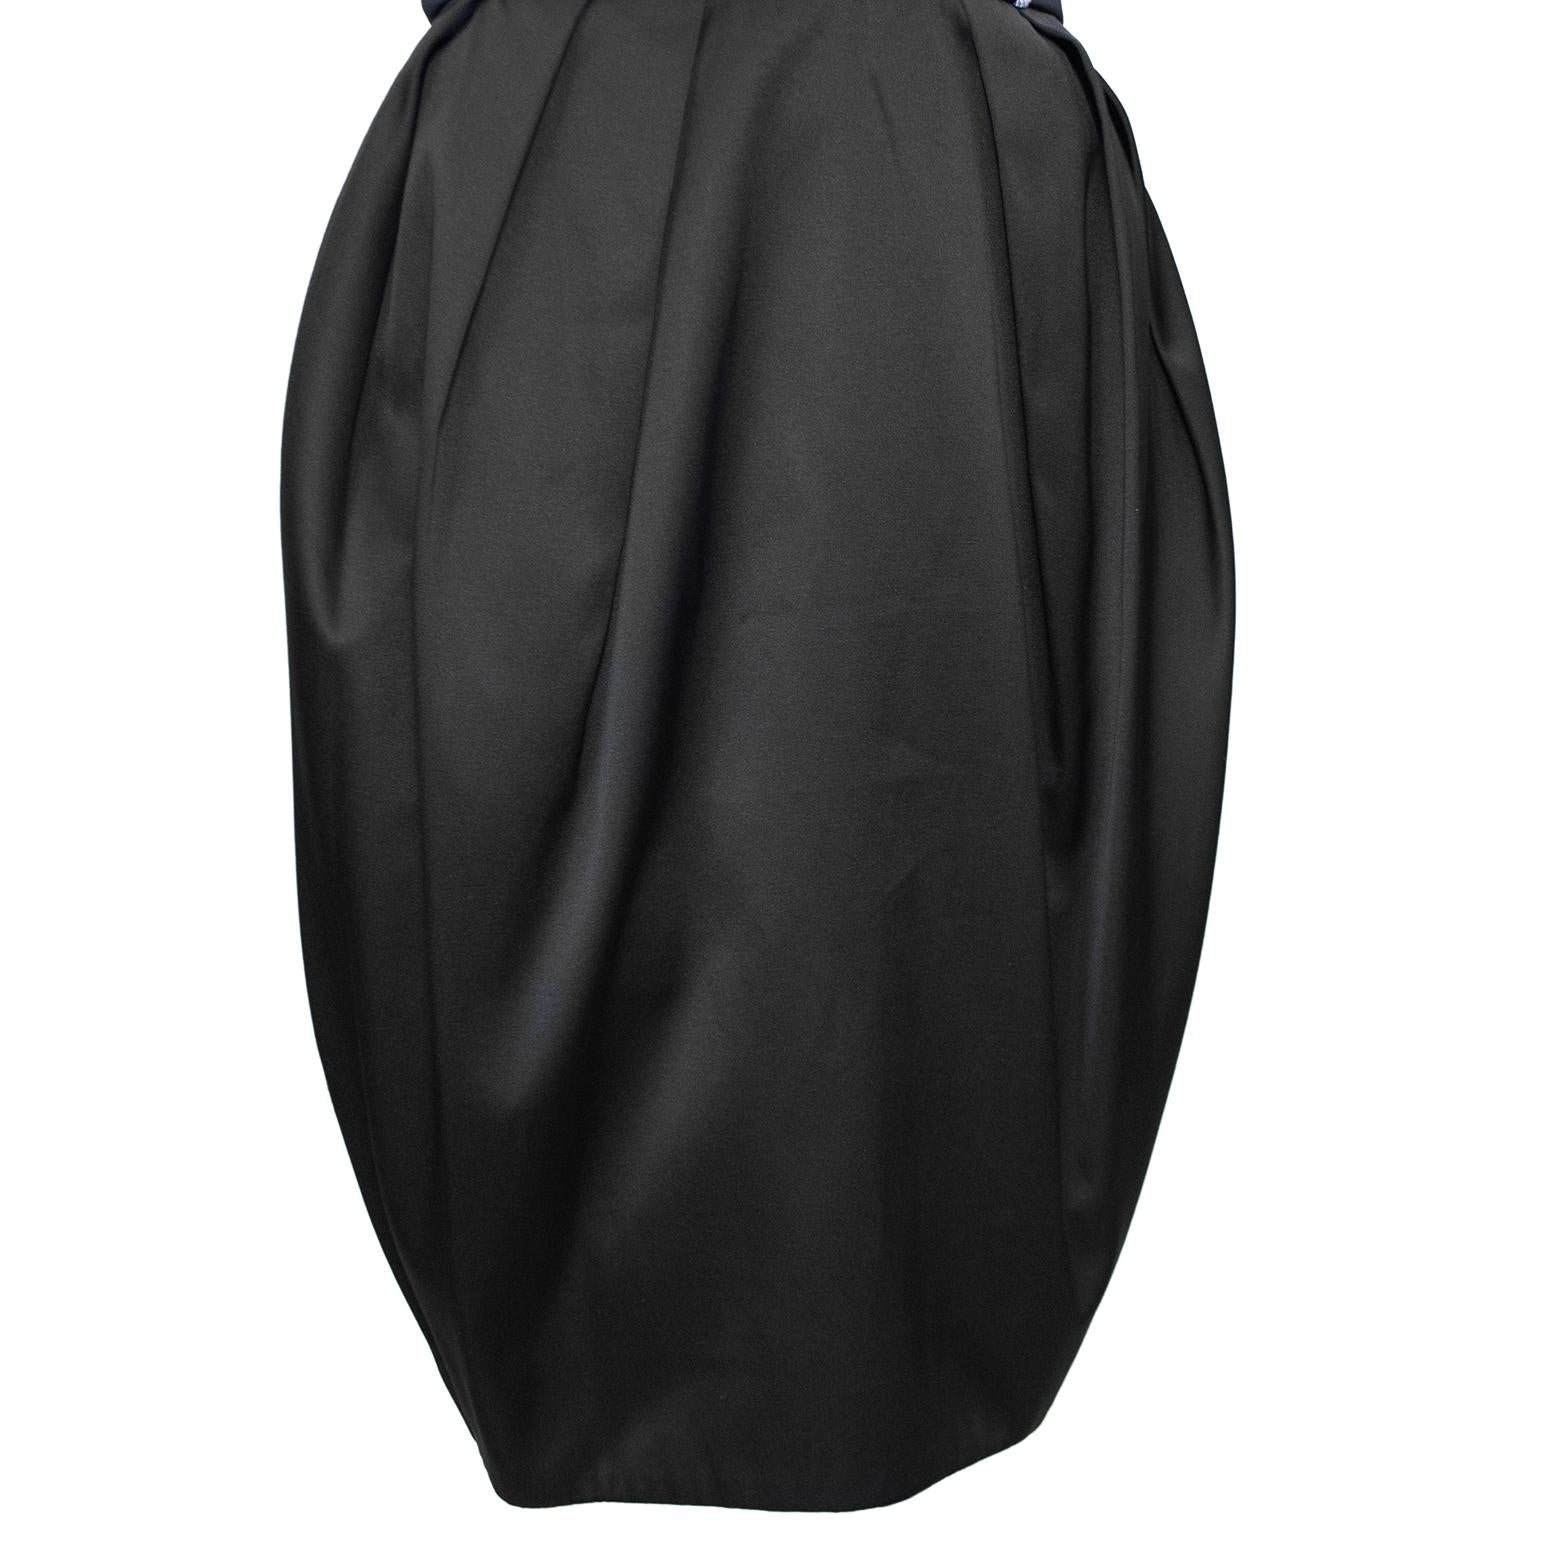 1980s Lanvin Black Satin Cocktail Dress with White Piping For Sale 1